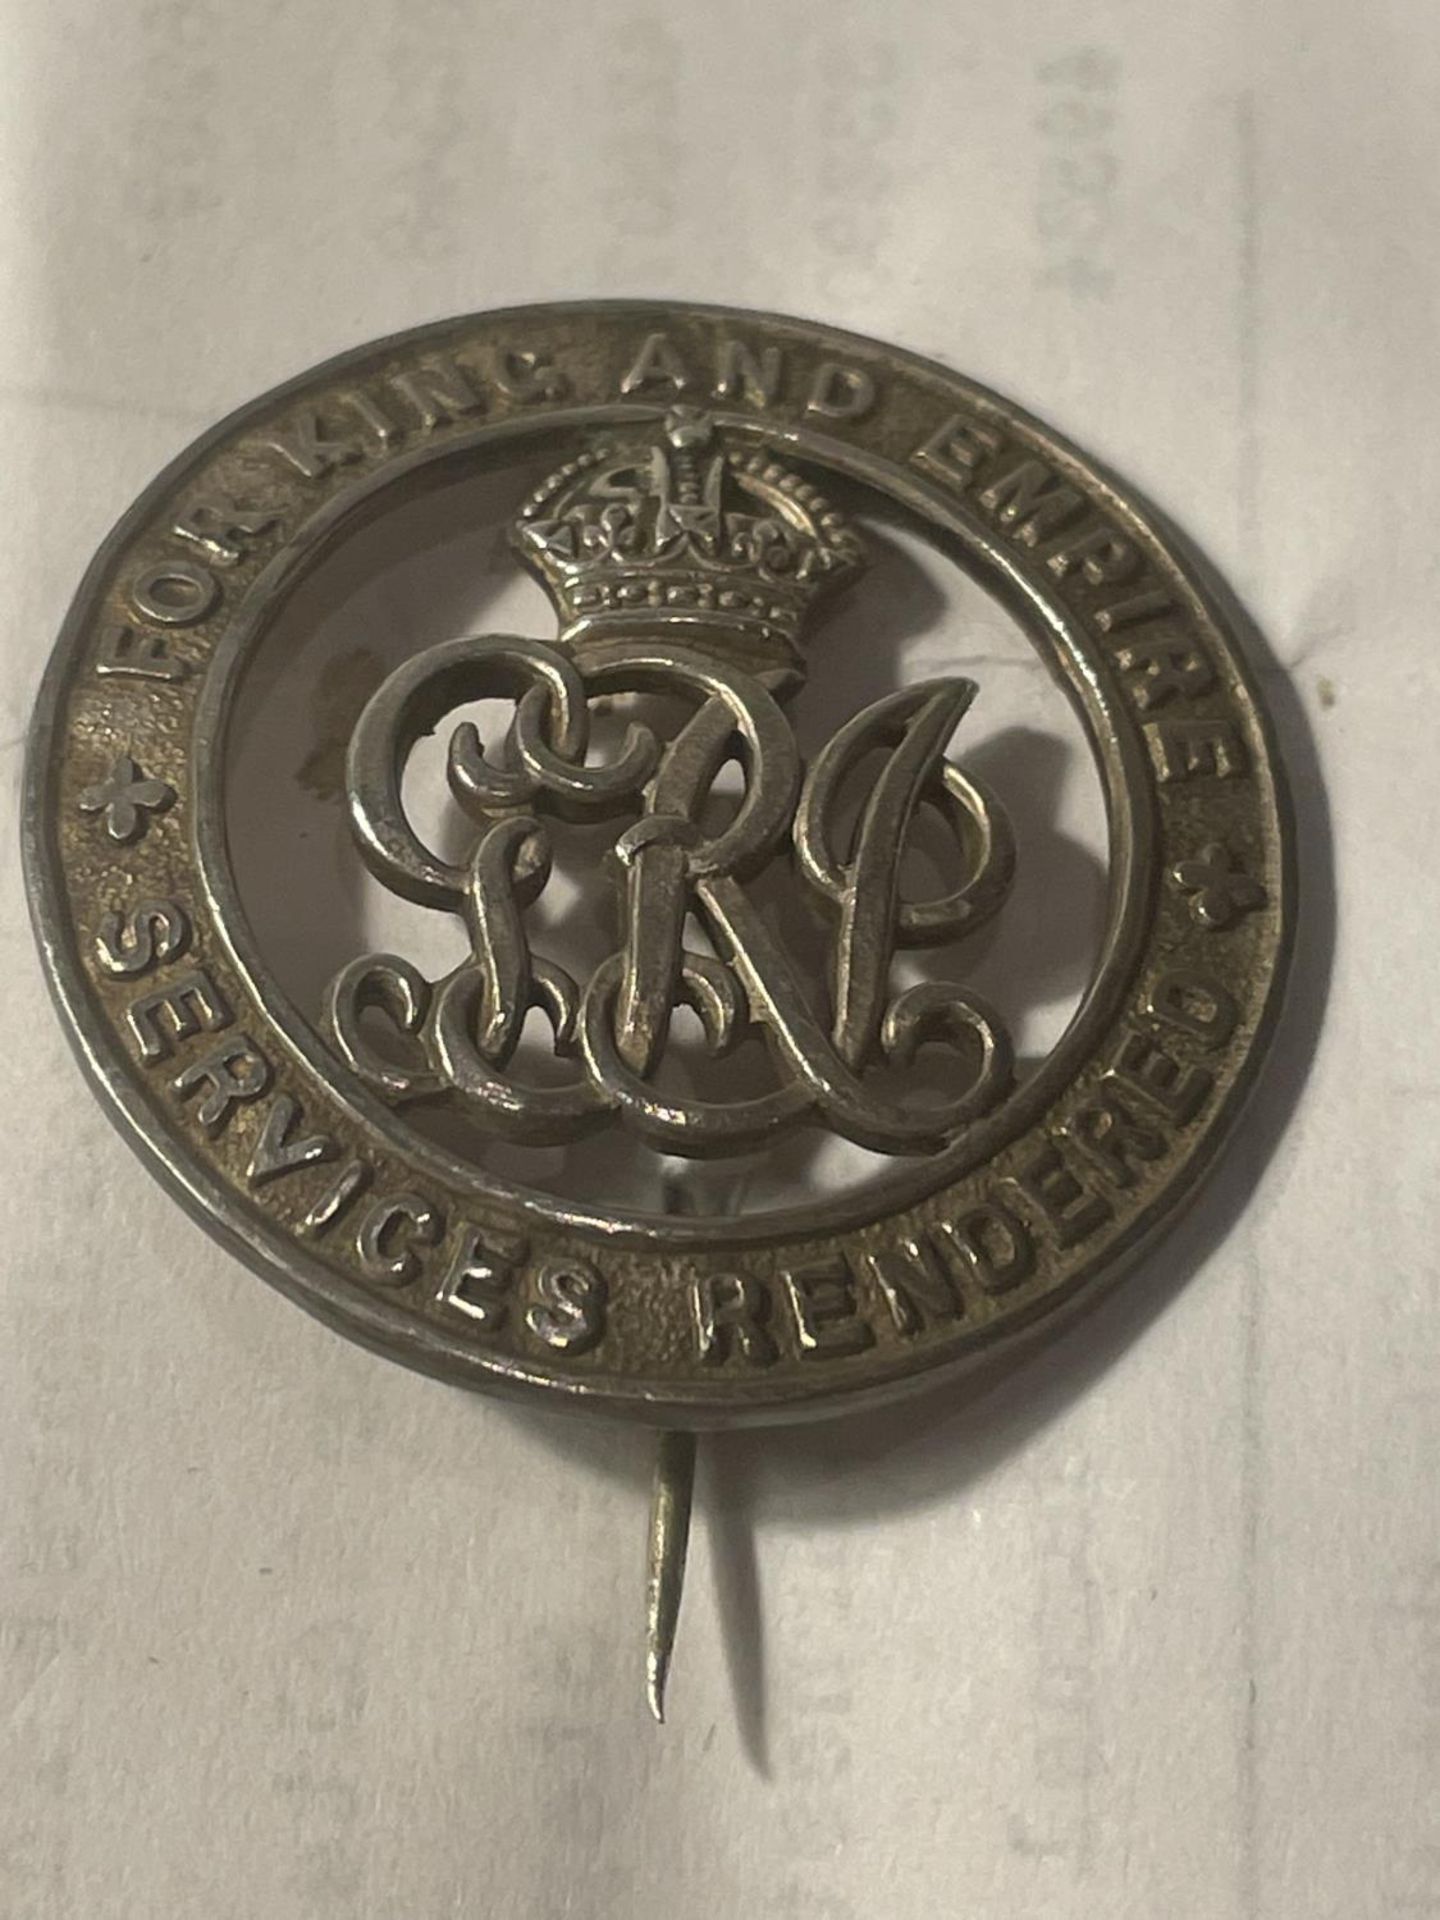 A FOR KING AND EMPIRE SERVICES RENDERED PIN BADGE